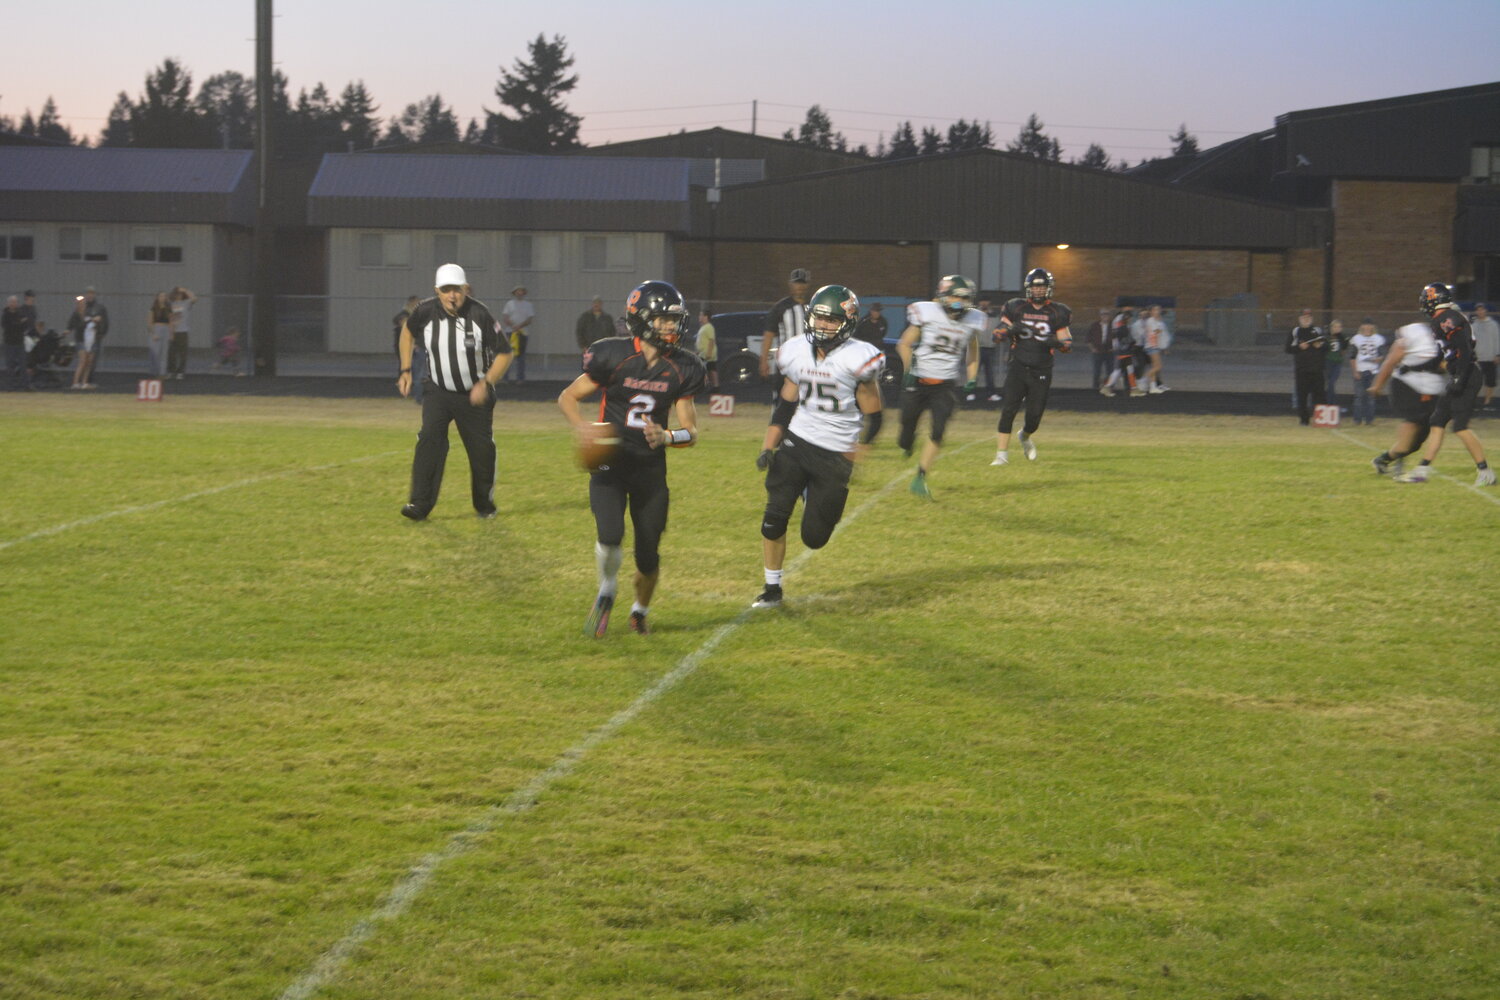 Jake Meldrum rolls out during Rainier's 56-26 win over MWP on Sept. 22.